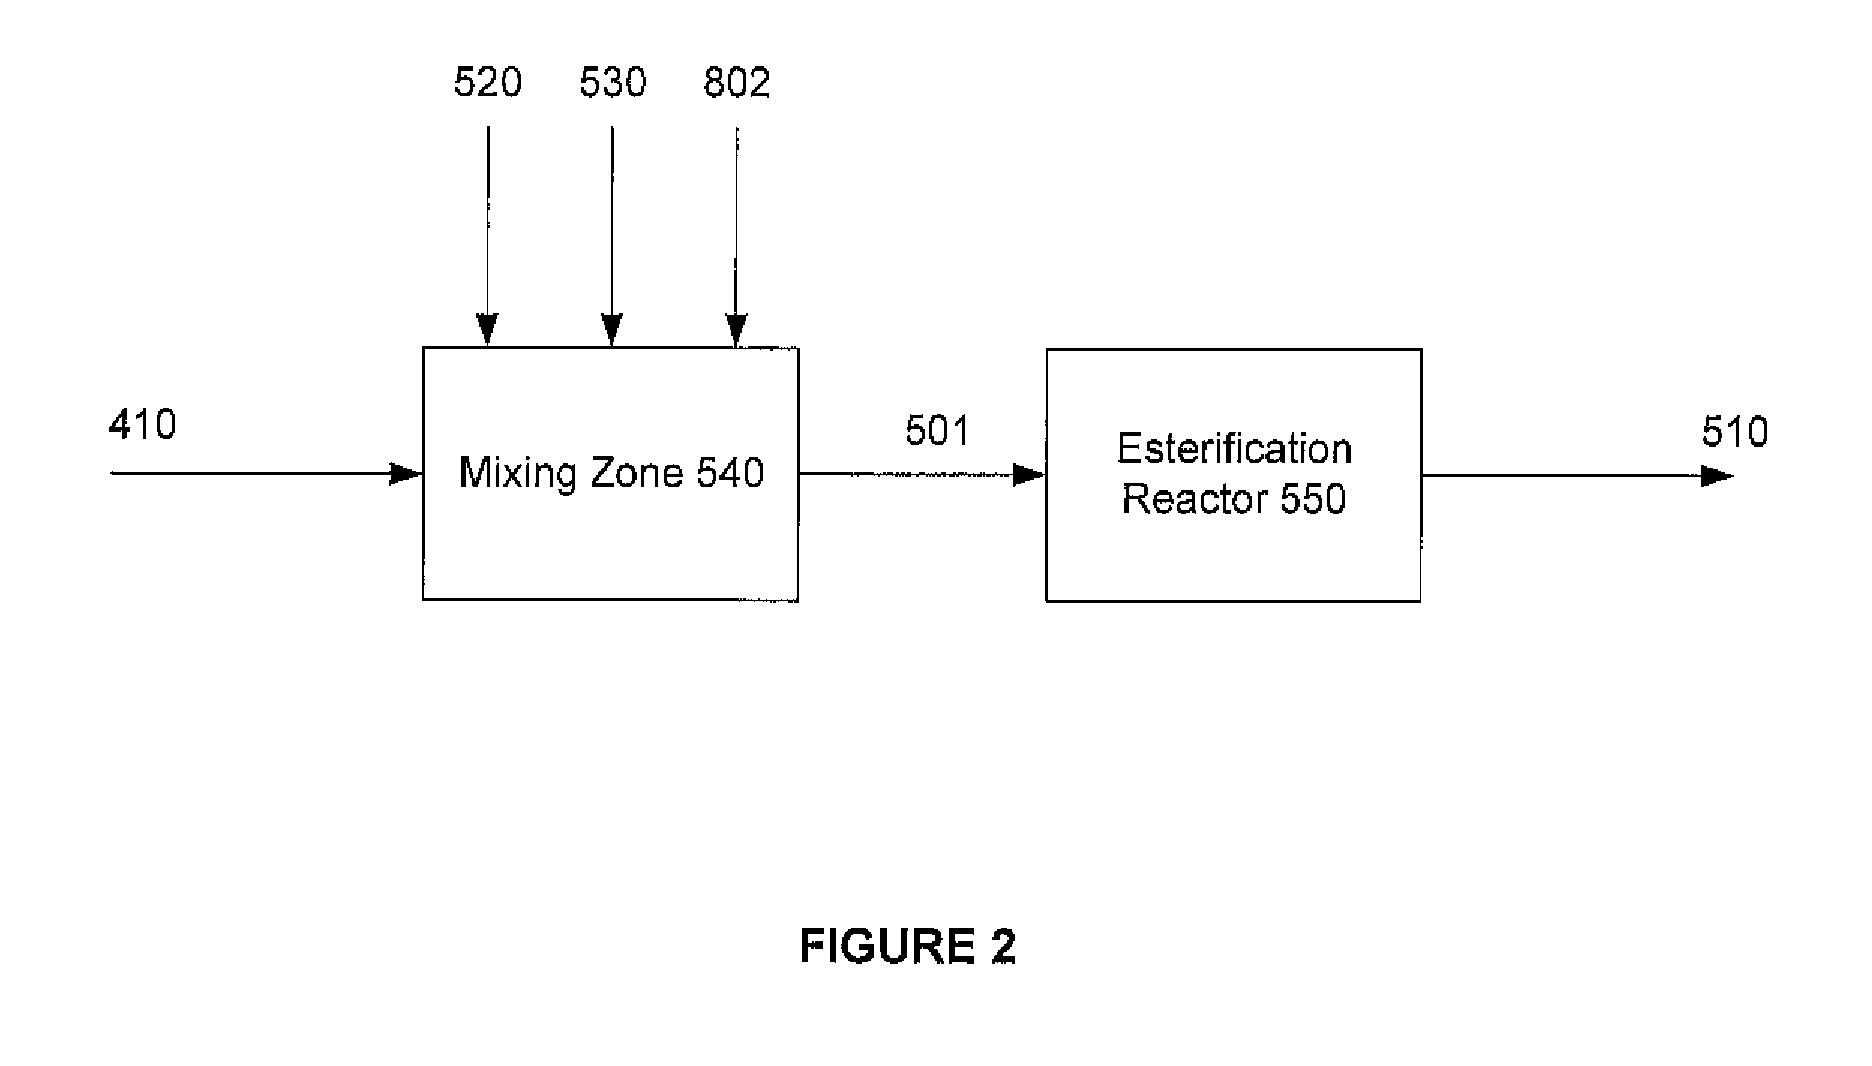 Method for producing purified dialkyl-furan-2,5-dicarboxylate vapor